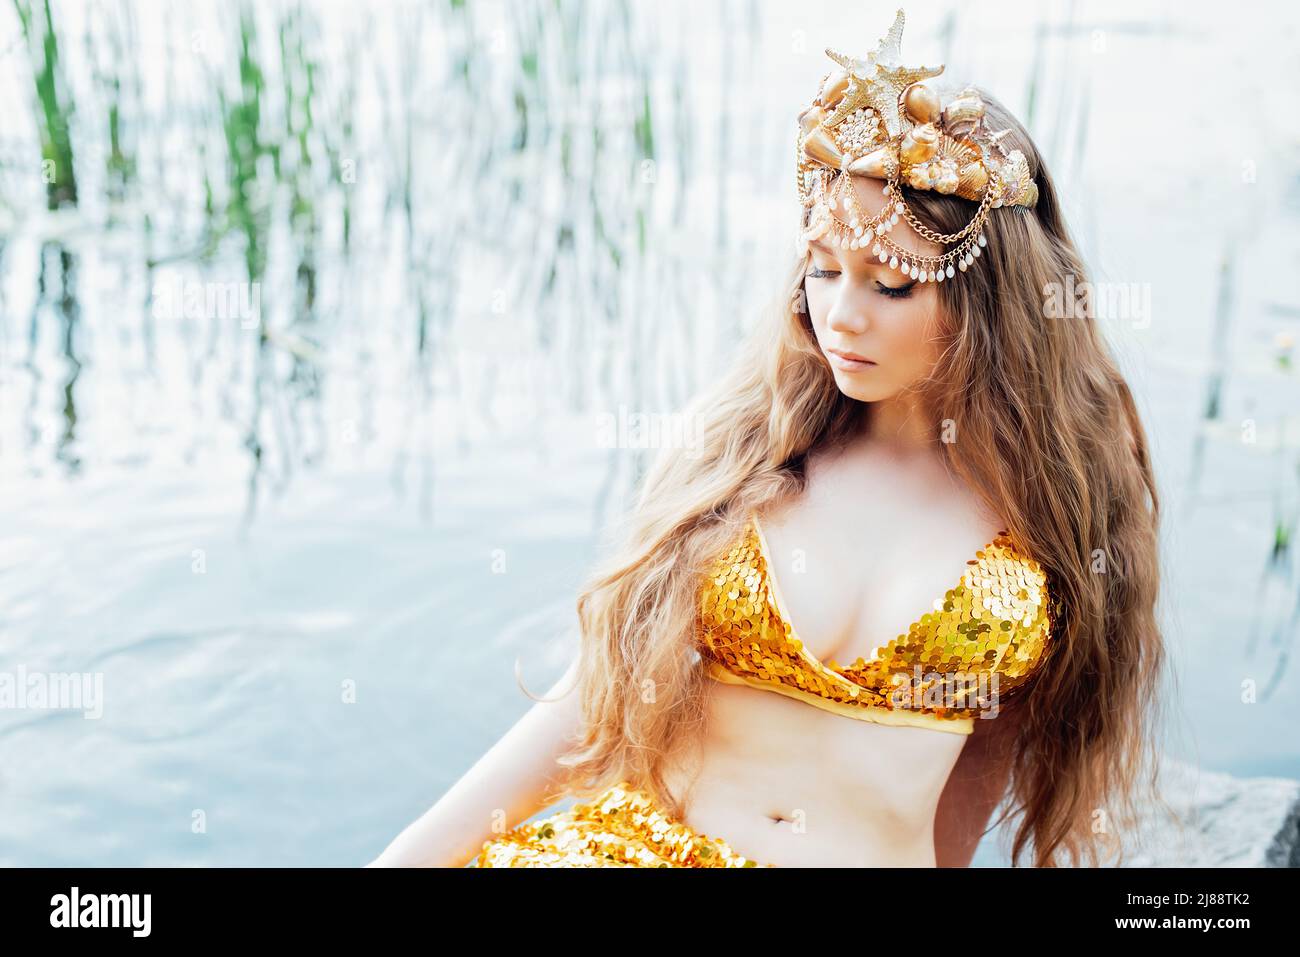 Fantasy woman real mermaid with trident myth goddess of sea with golden  tail sitting in sunset on rocks.. Gold hair crown shells pearls jewelry.  Merma Stock Photo - Alamy